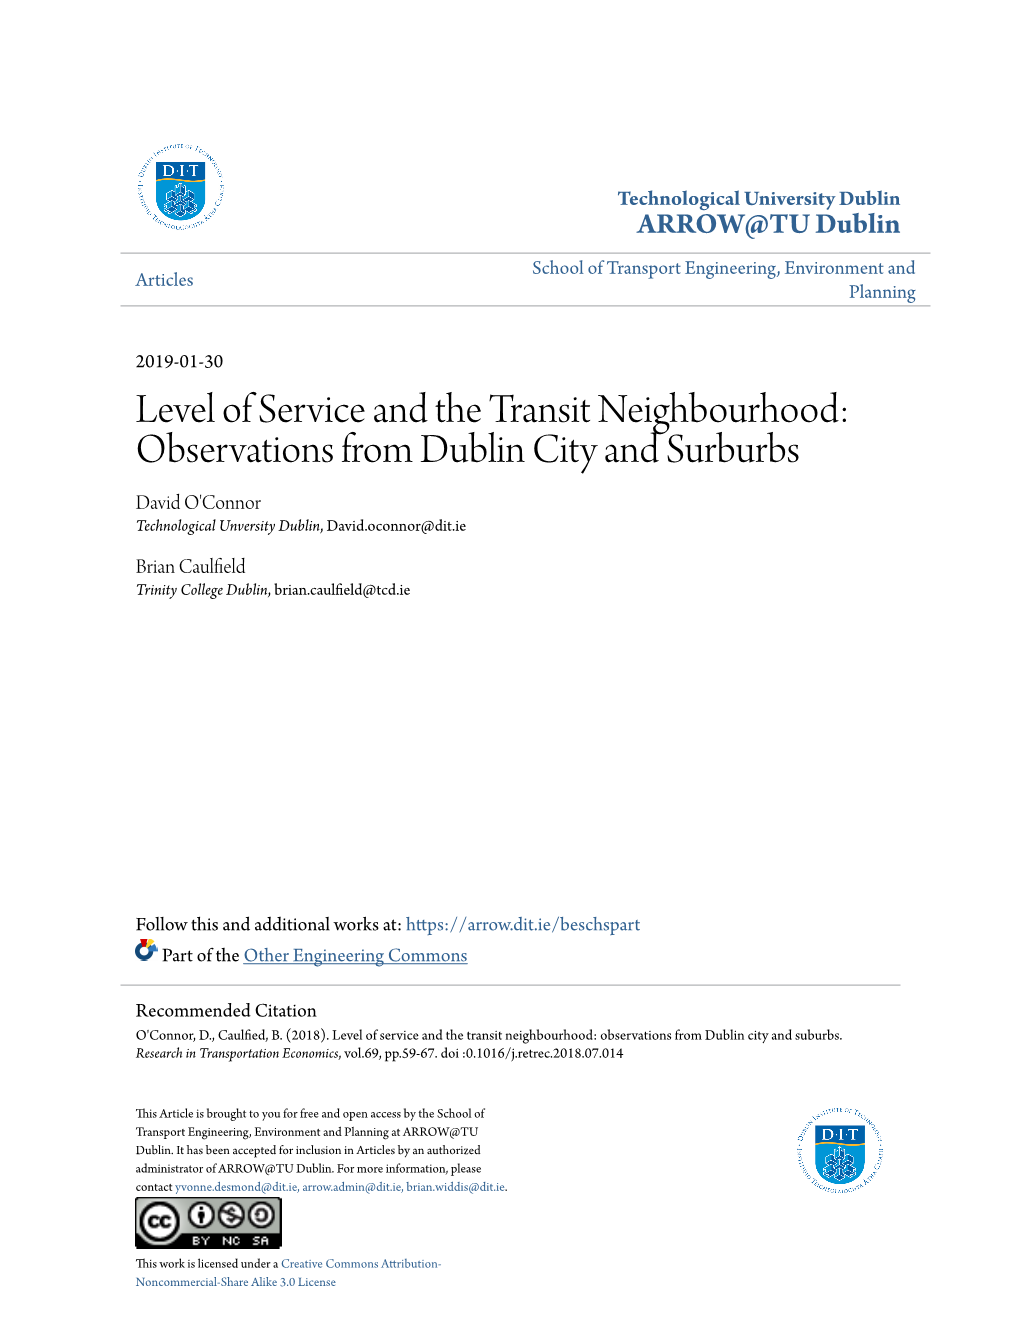 Level of Service and the Transit Neighbourhood: Observations from Dublin City and Surburbs David O'connor Technological Unversity Dublin, David.Oconnor@Dit.Ie